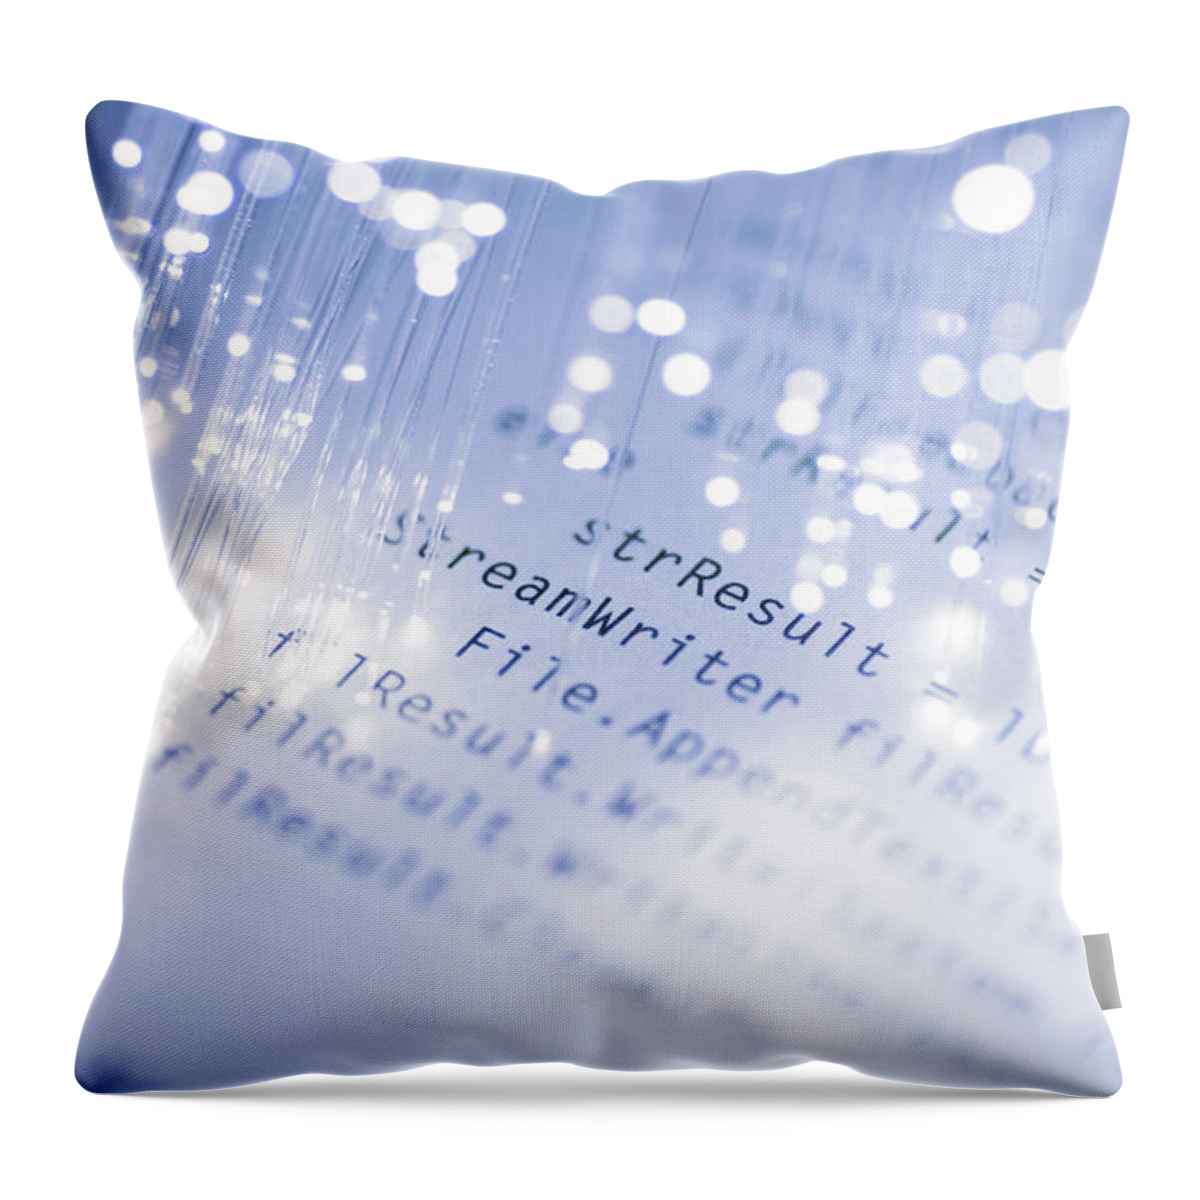 Expertise Throw Pillow featuring the photograph Code & Fiber Optics by The-tor